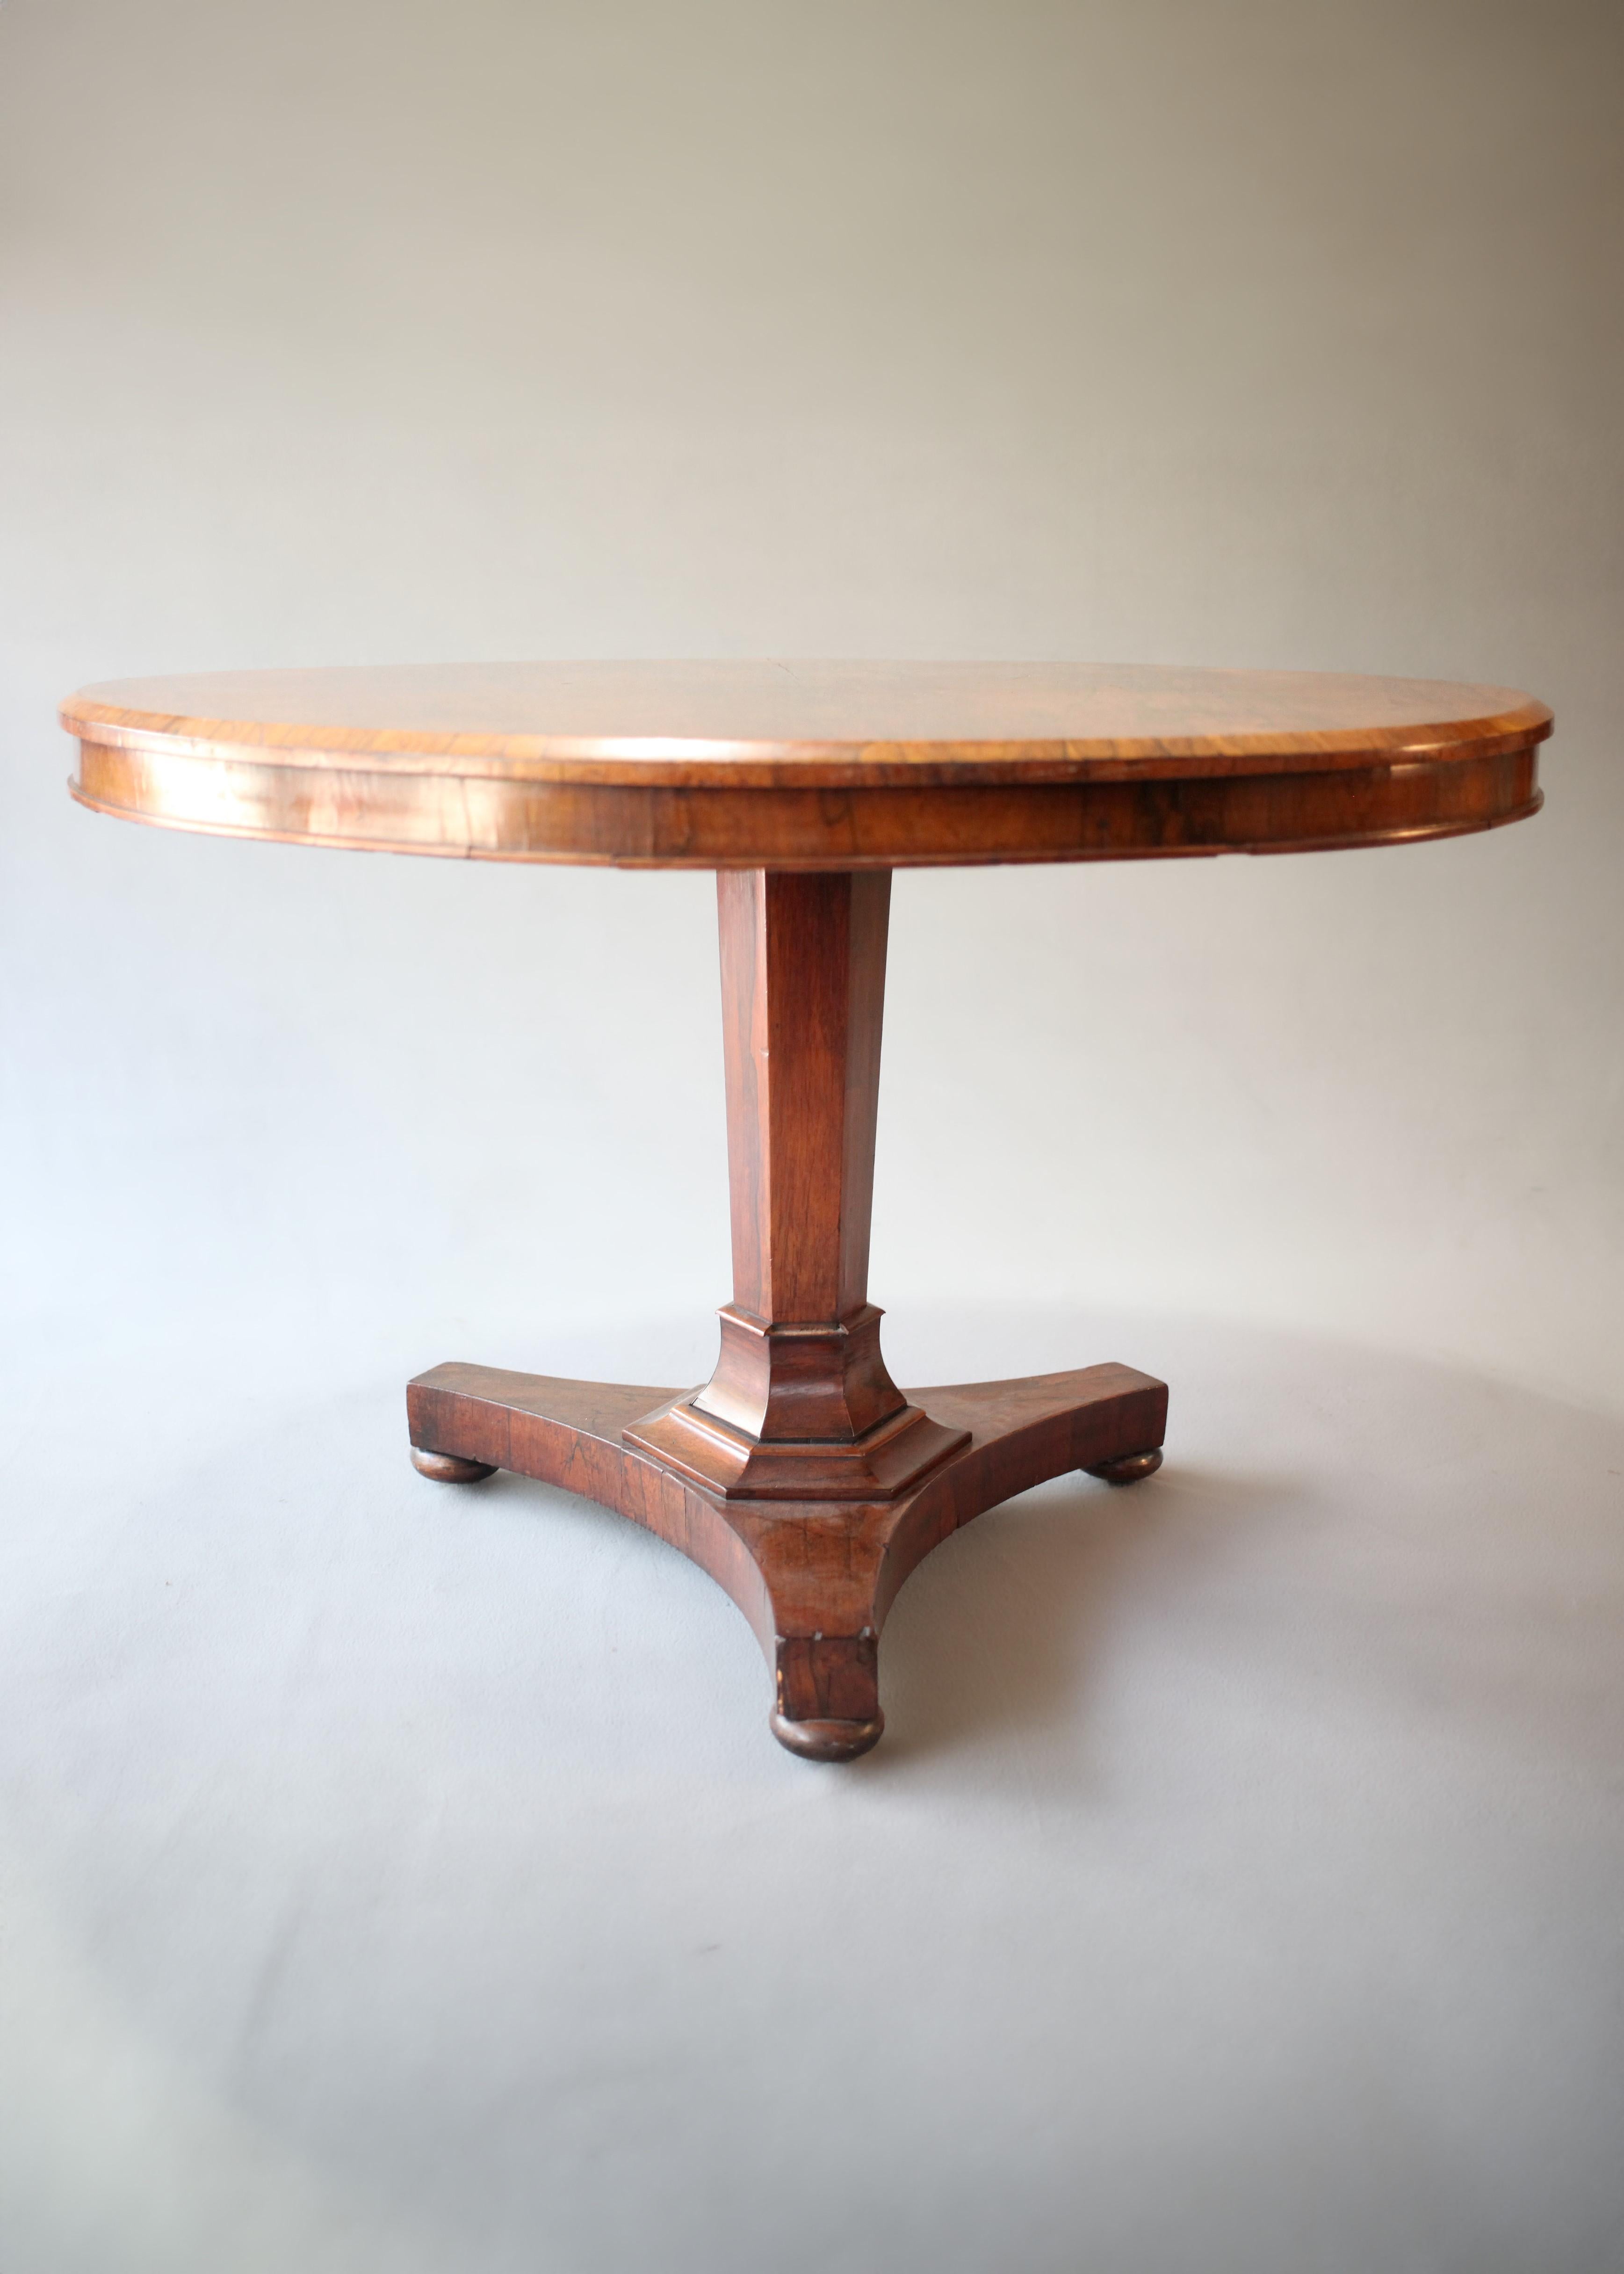 Hand-Carved 19th Century English Empire Walnut Centre Table